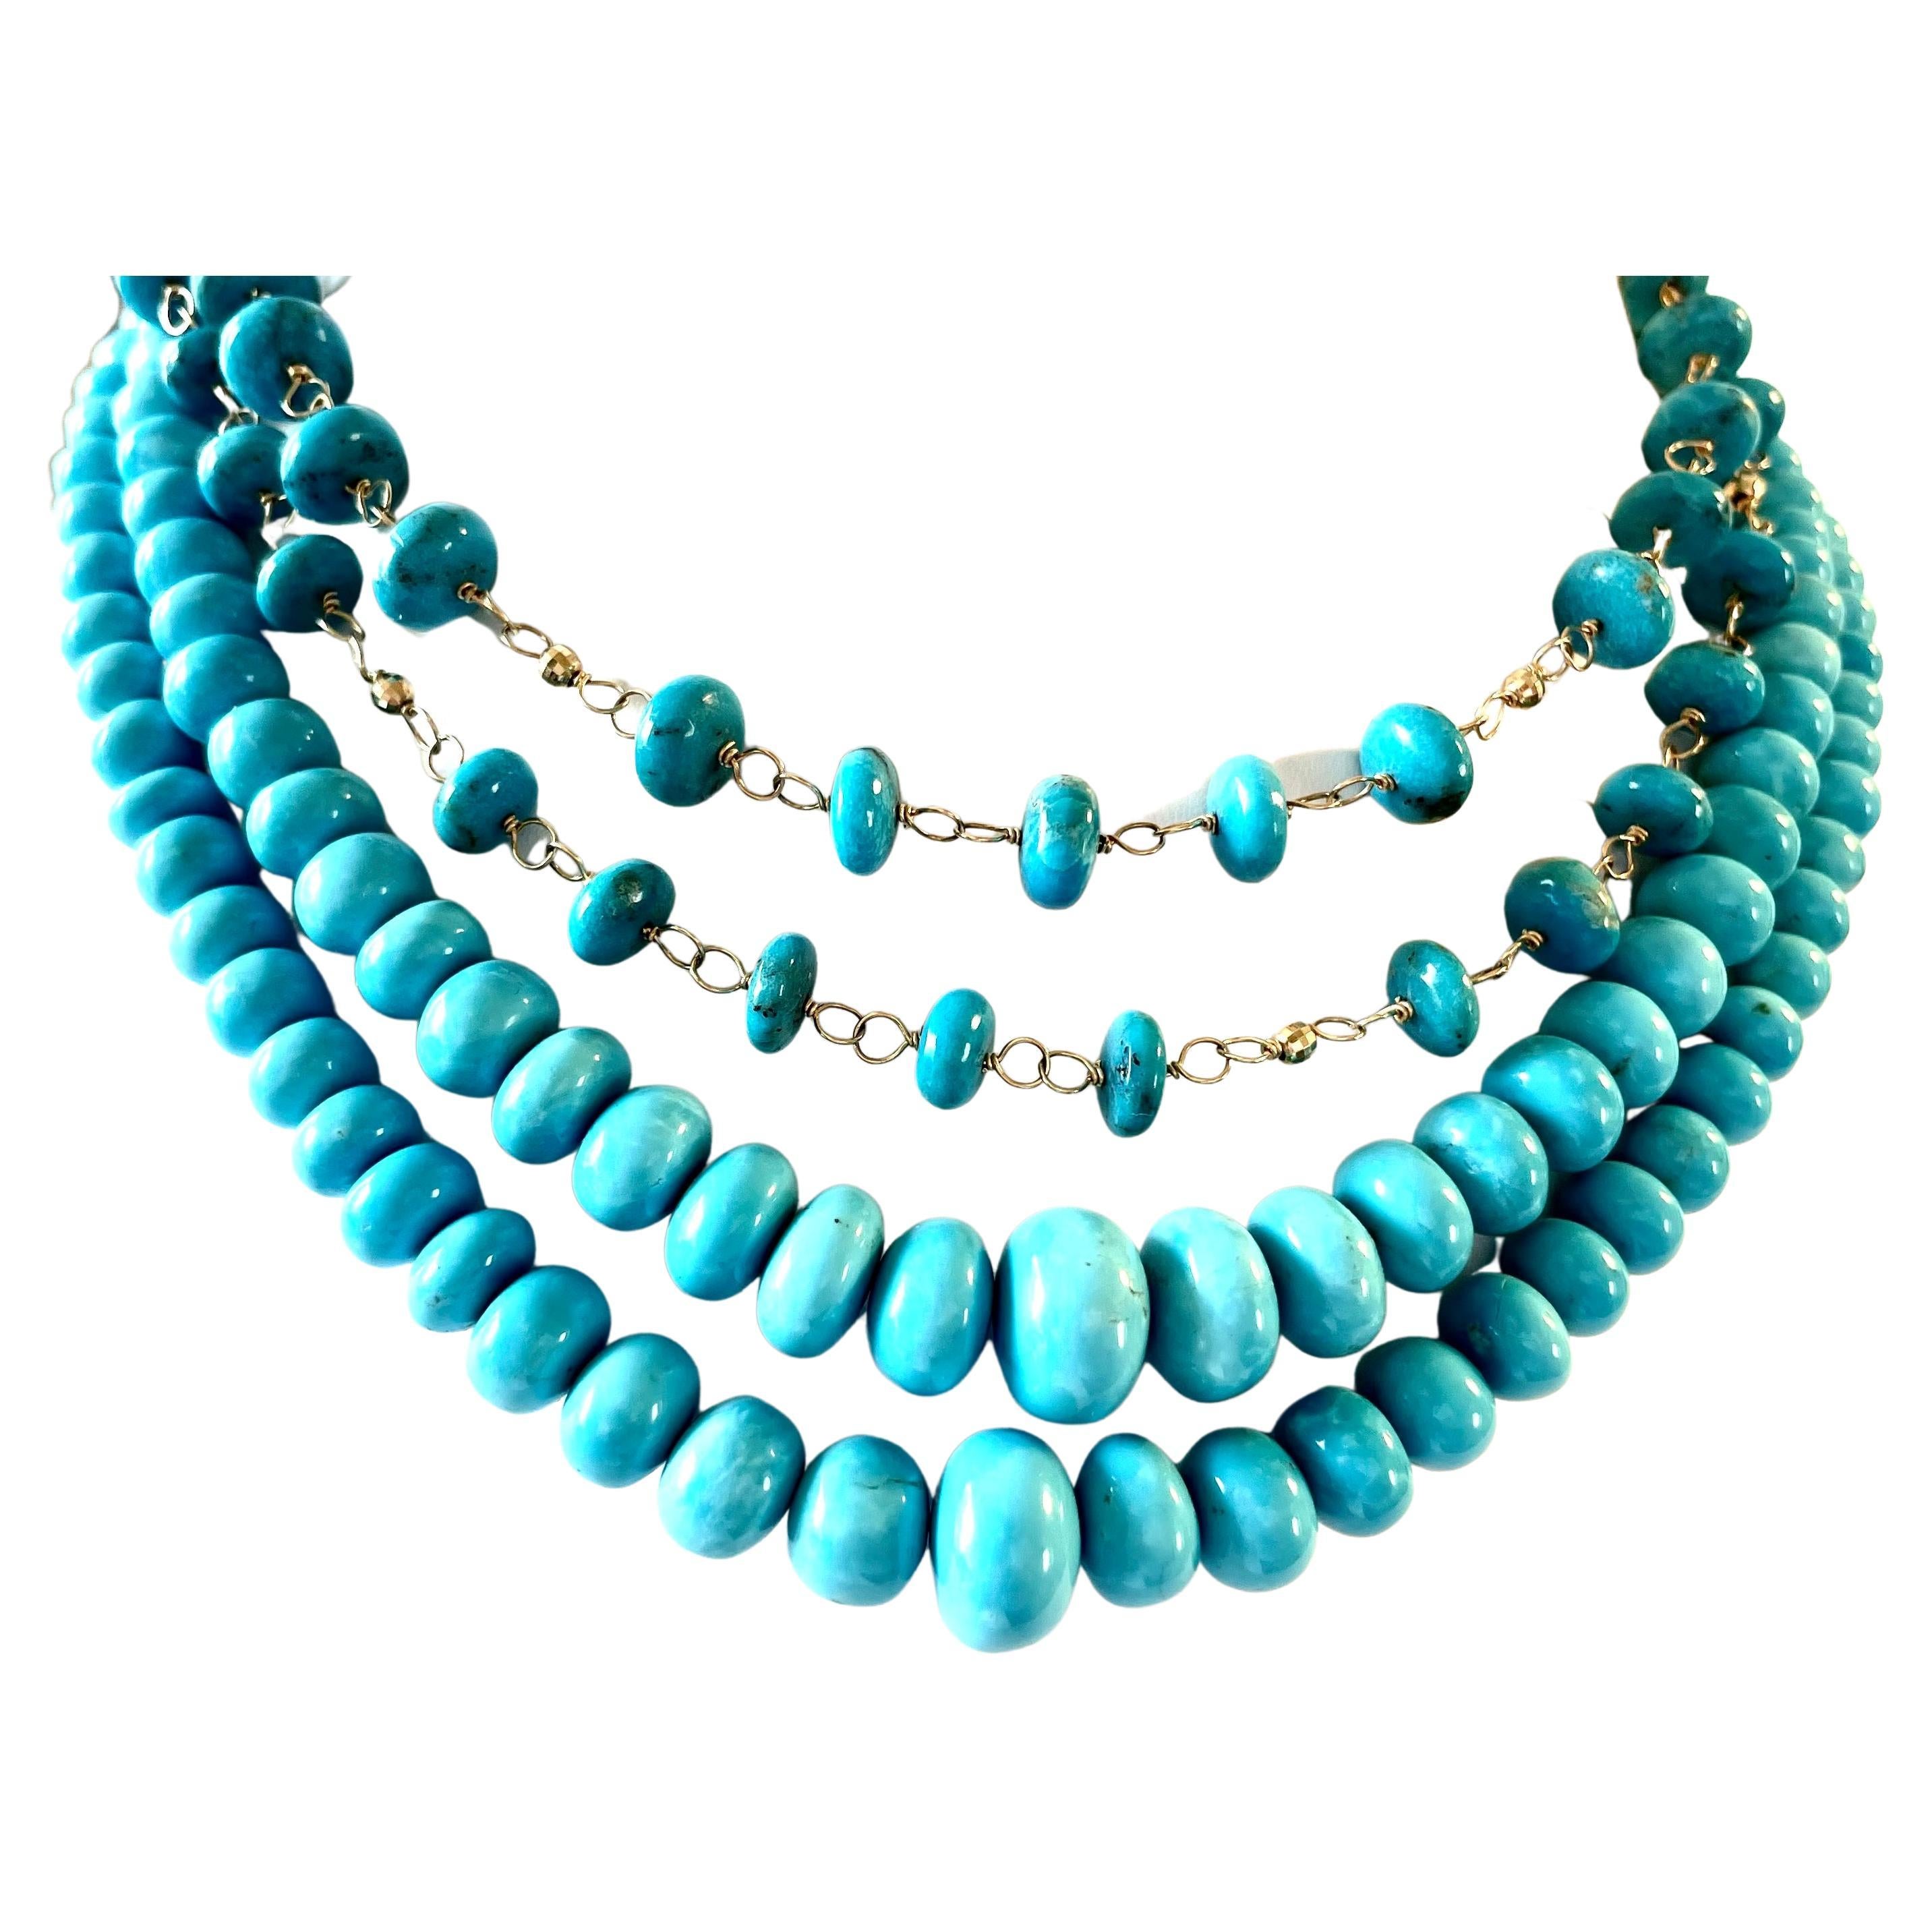 Bead Sleeping Beauty Turquoise Long Necklace For Sale